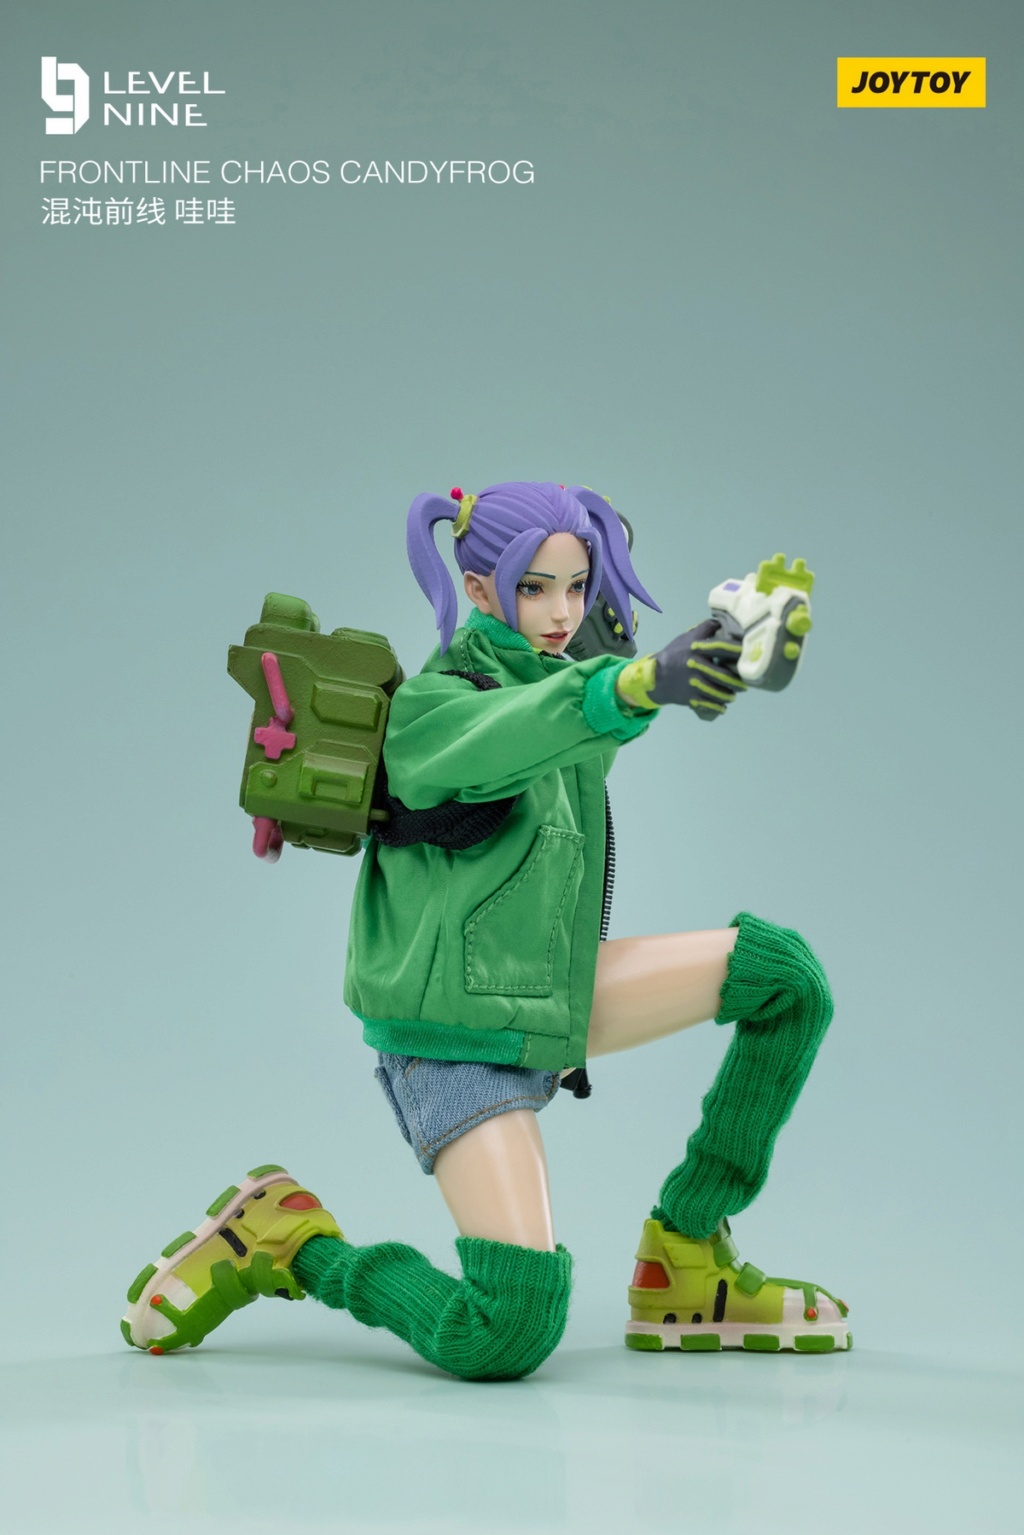 NEW PRODUCT: JOYTOY 1/12 FRONTLINE CHAOS CANDYFROG Chaos Frontline Wow 0767